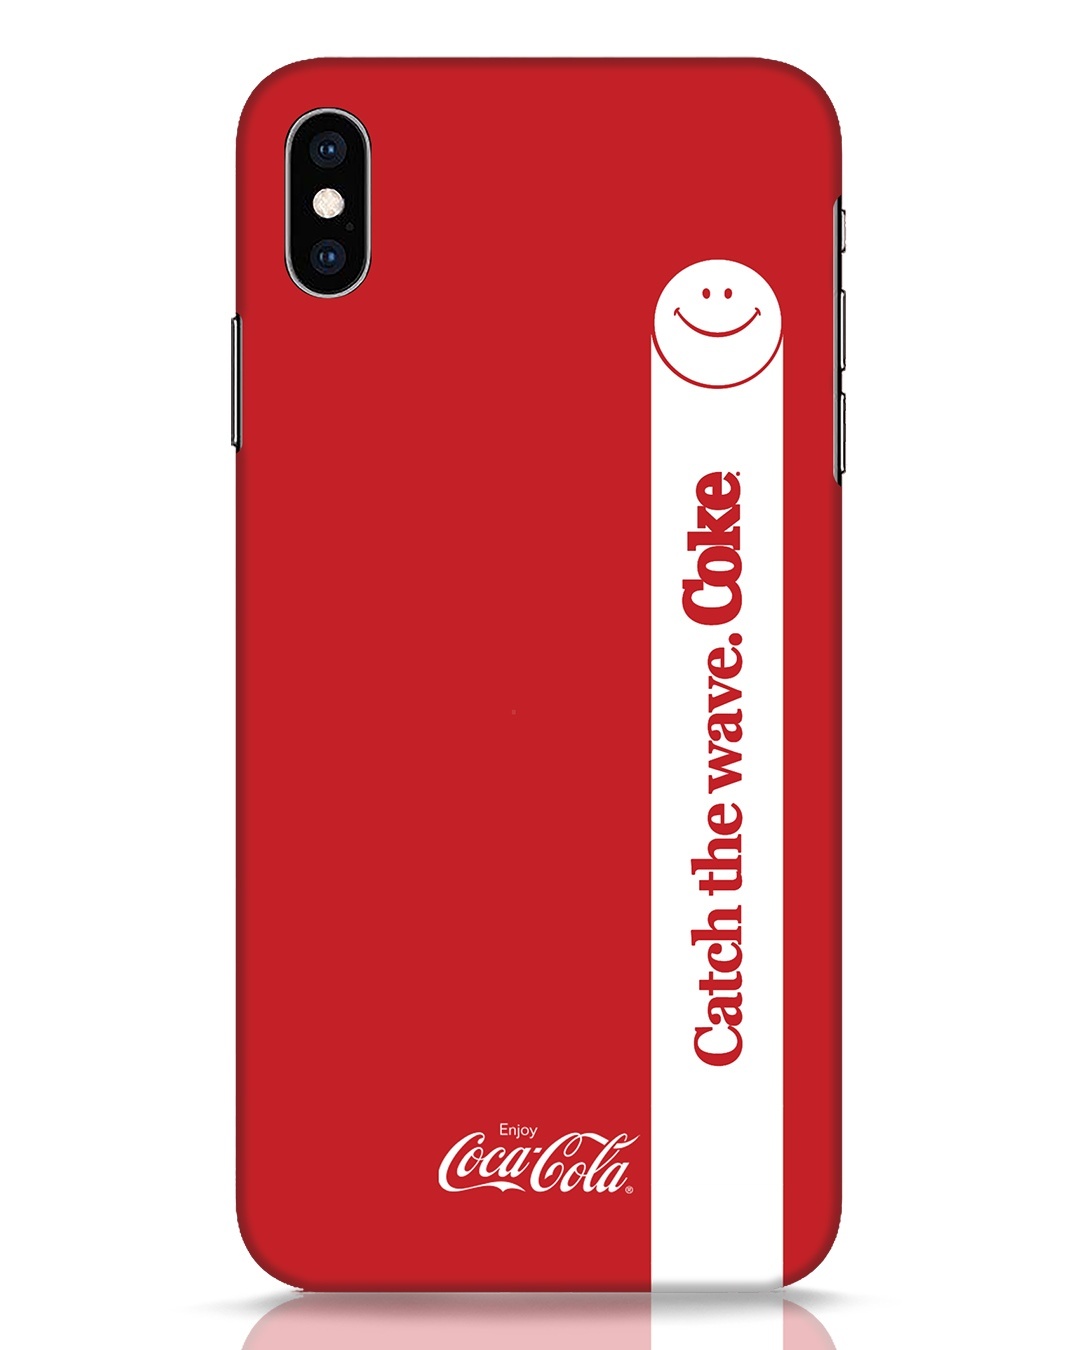 Buy Coca-Cola Catch The Coke White iPhone XS Max Mobile Cover for ...